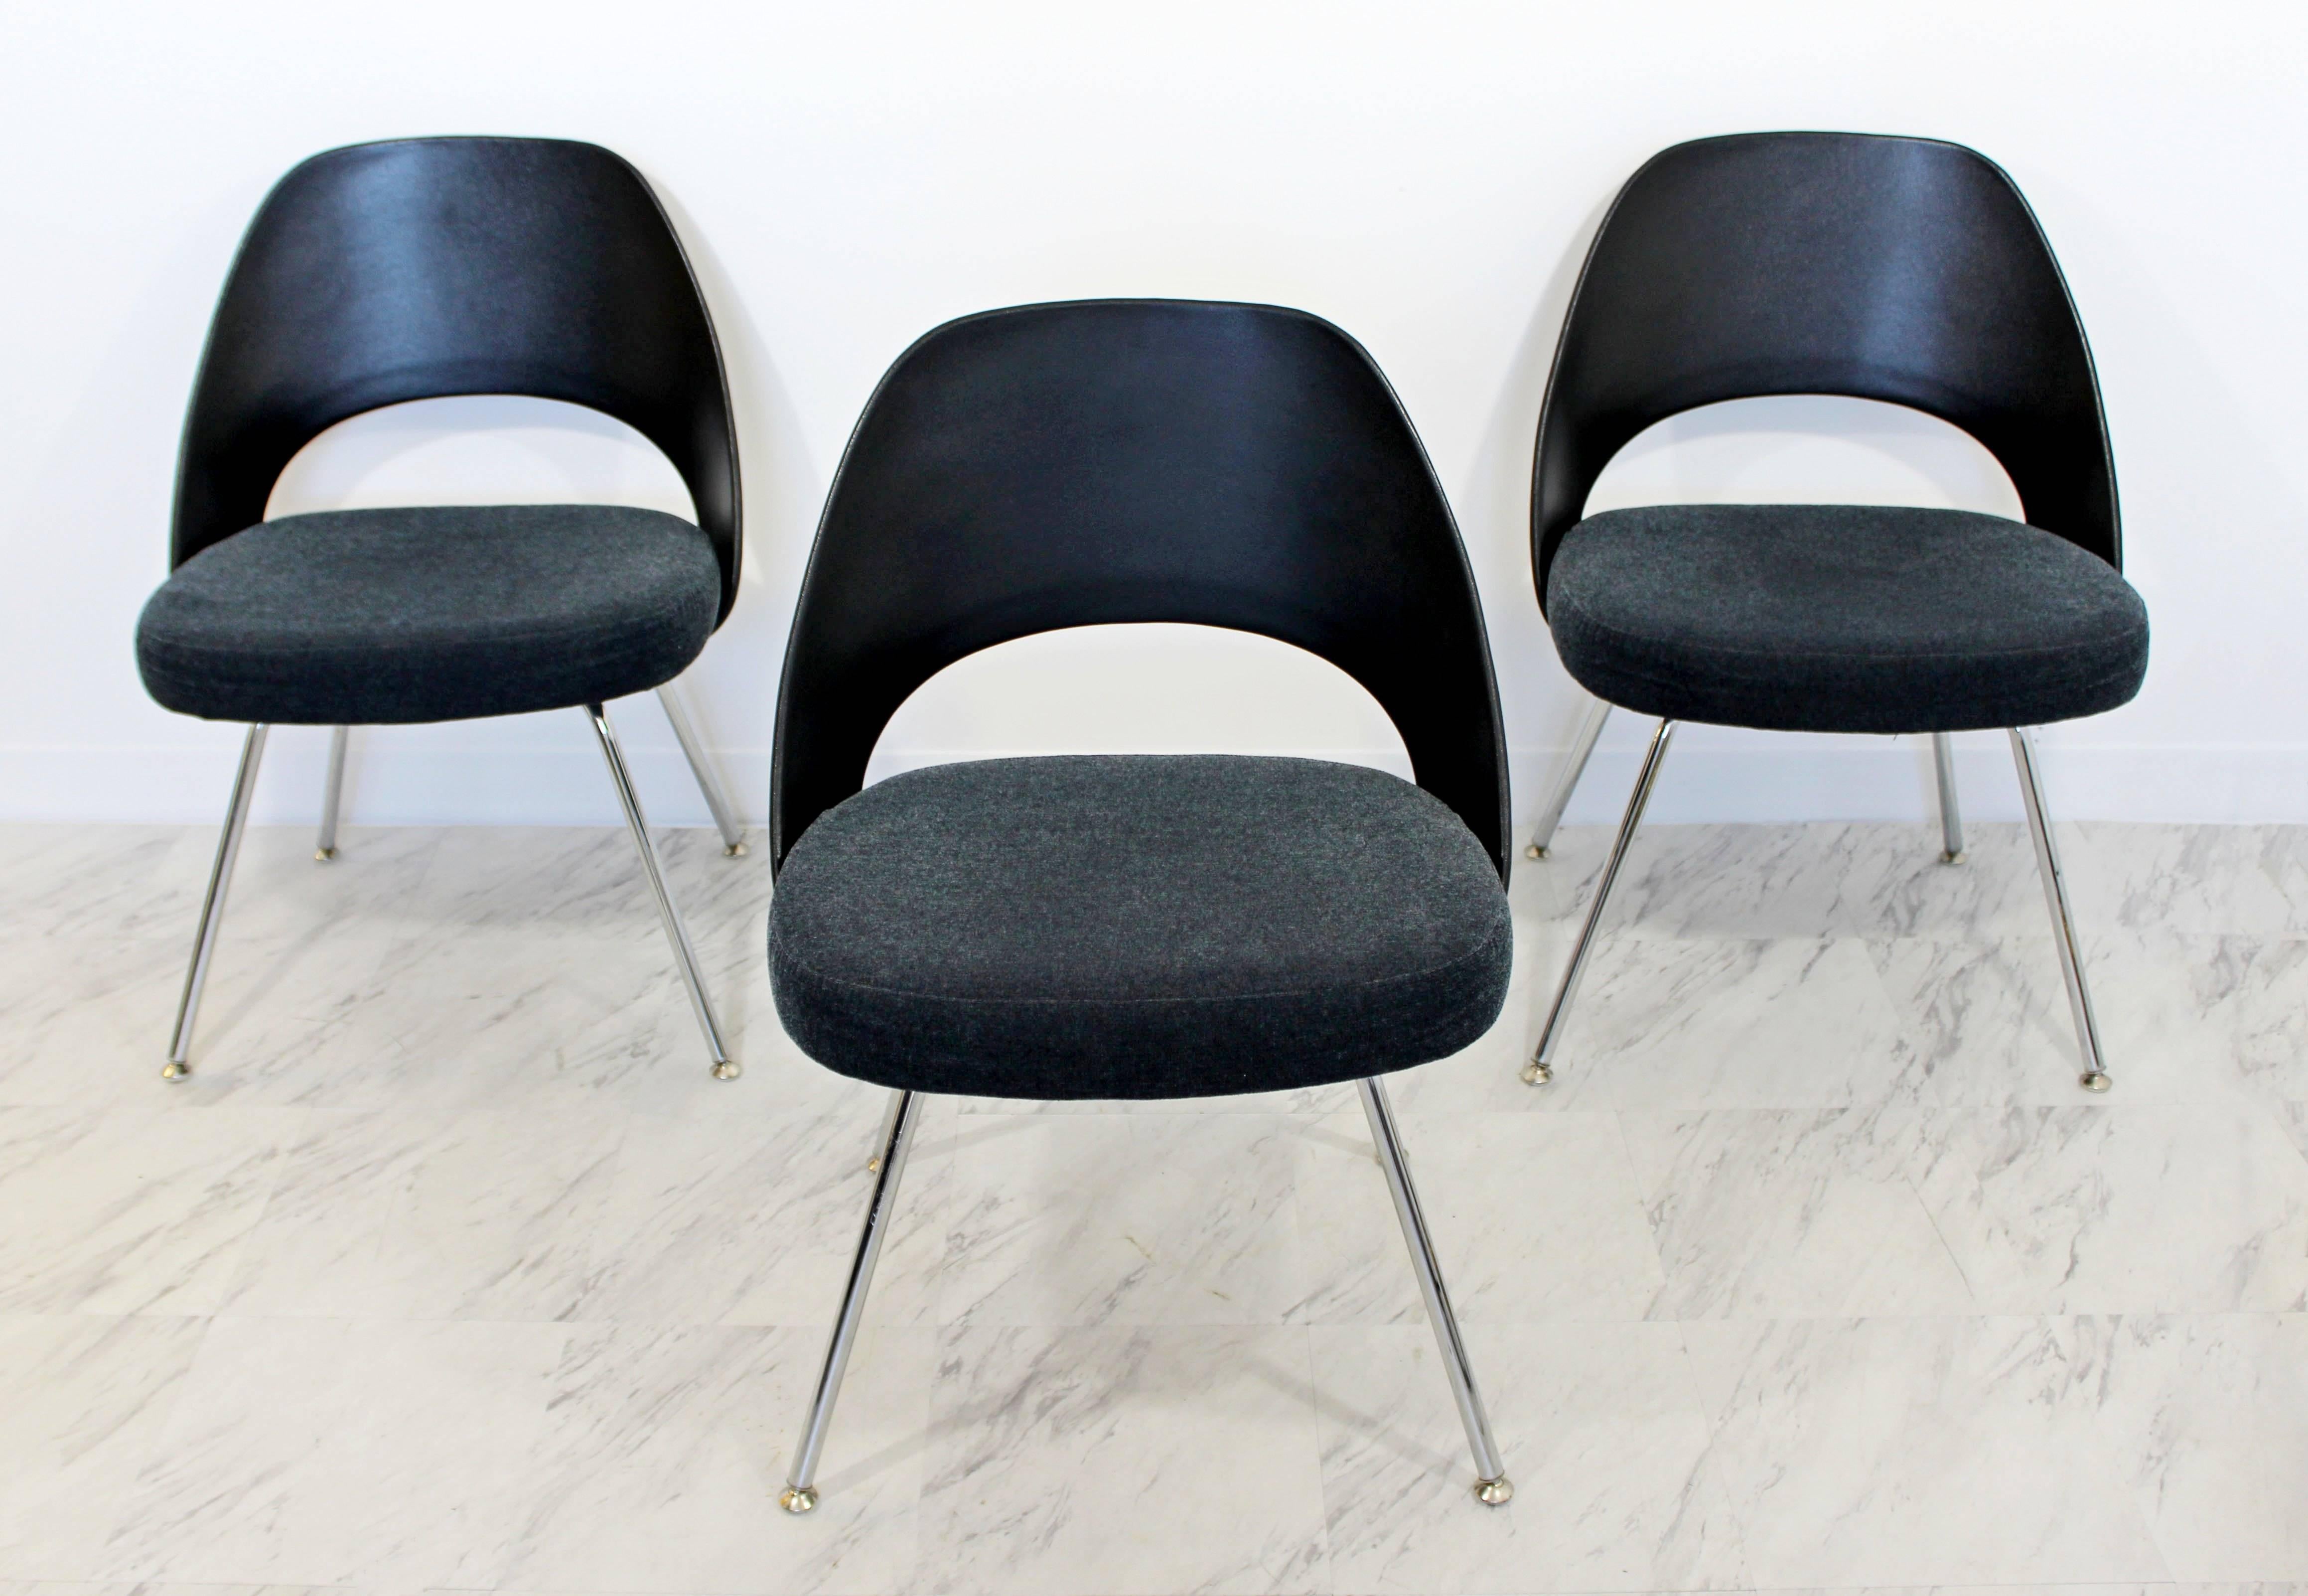 For your consideration is a gorgeous set of three office chairs, designed by Eero Saarinen for Knoll, circa the 1960s. These are reproduced in 2011. In excellent condition. The dimensions are 21